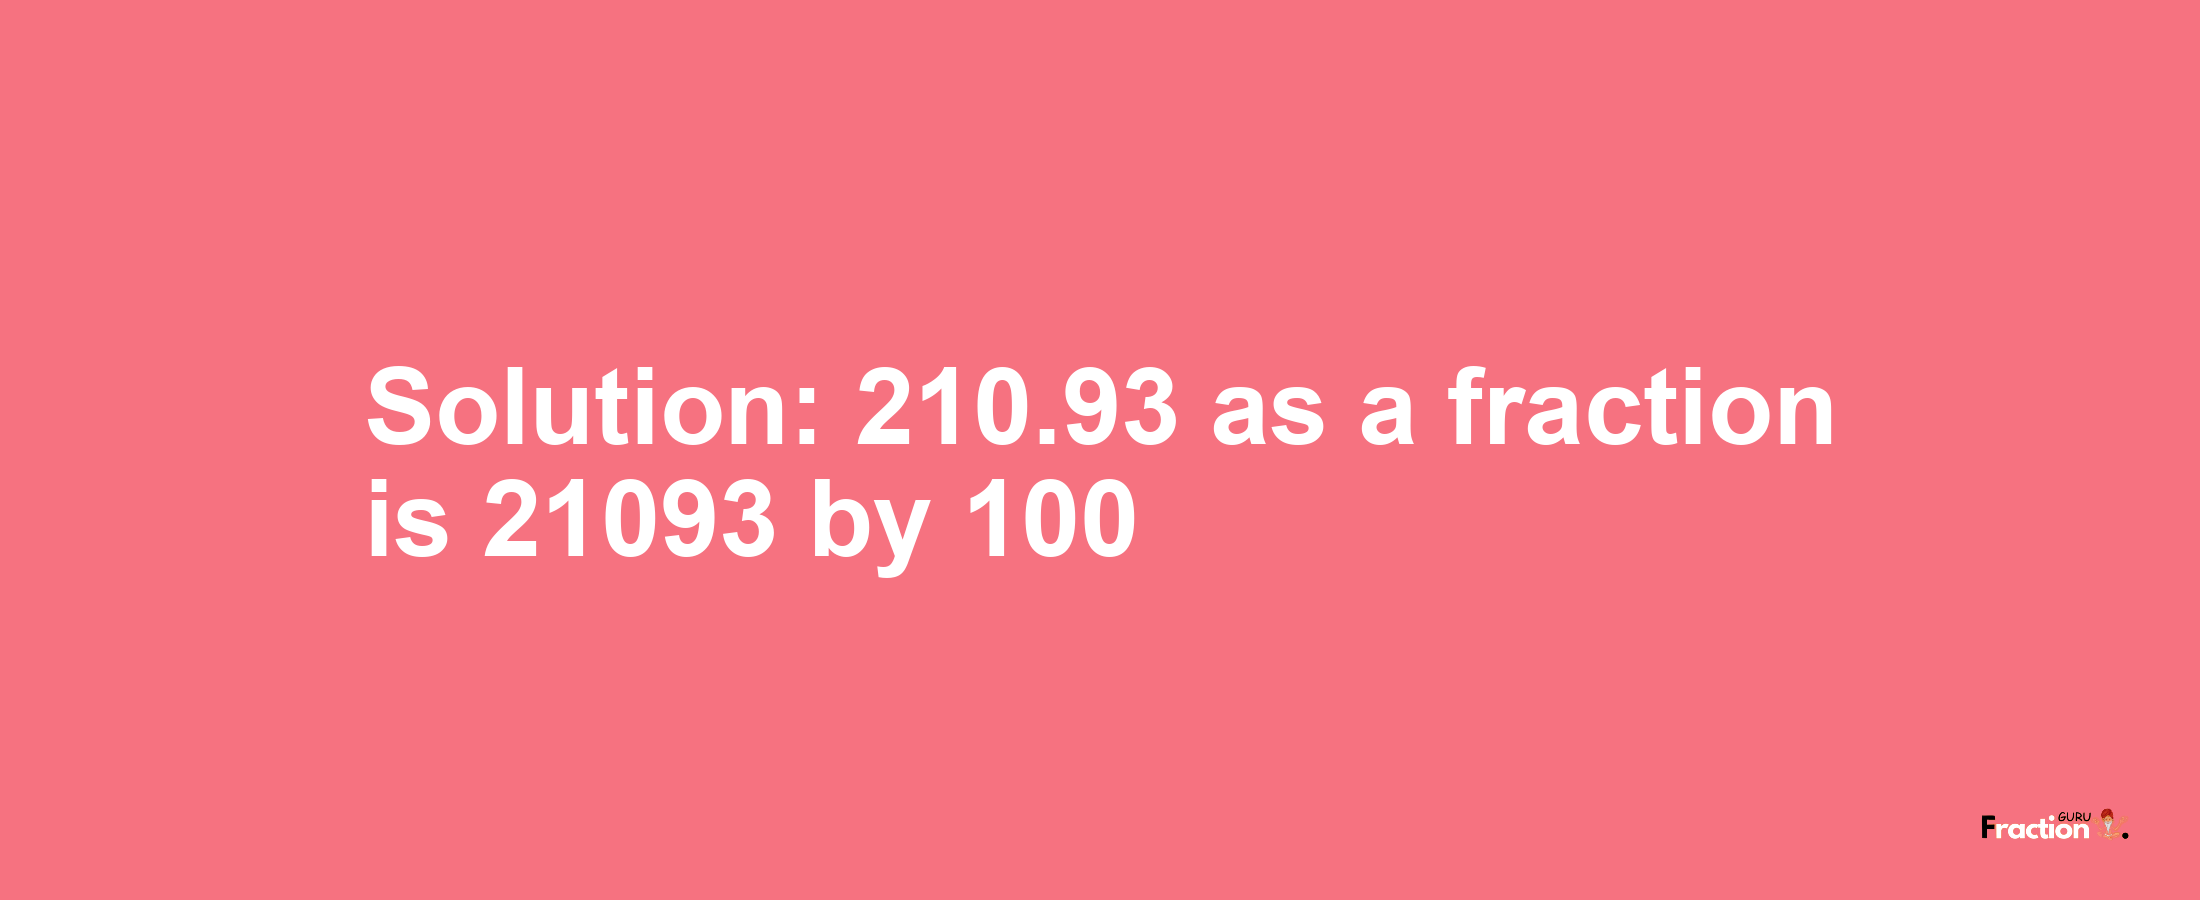 Solution:210.93 as a fraction is 21093/100